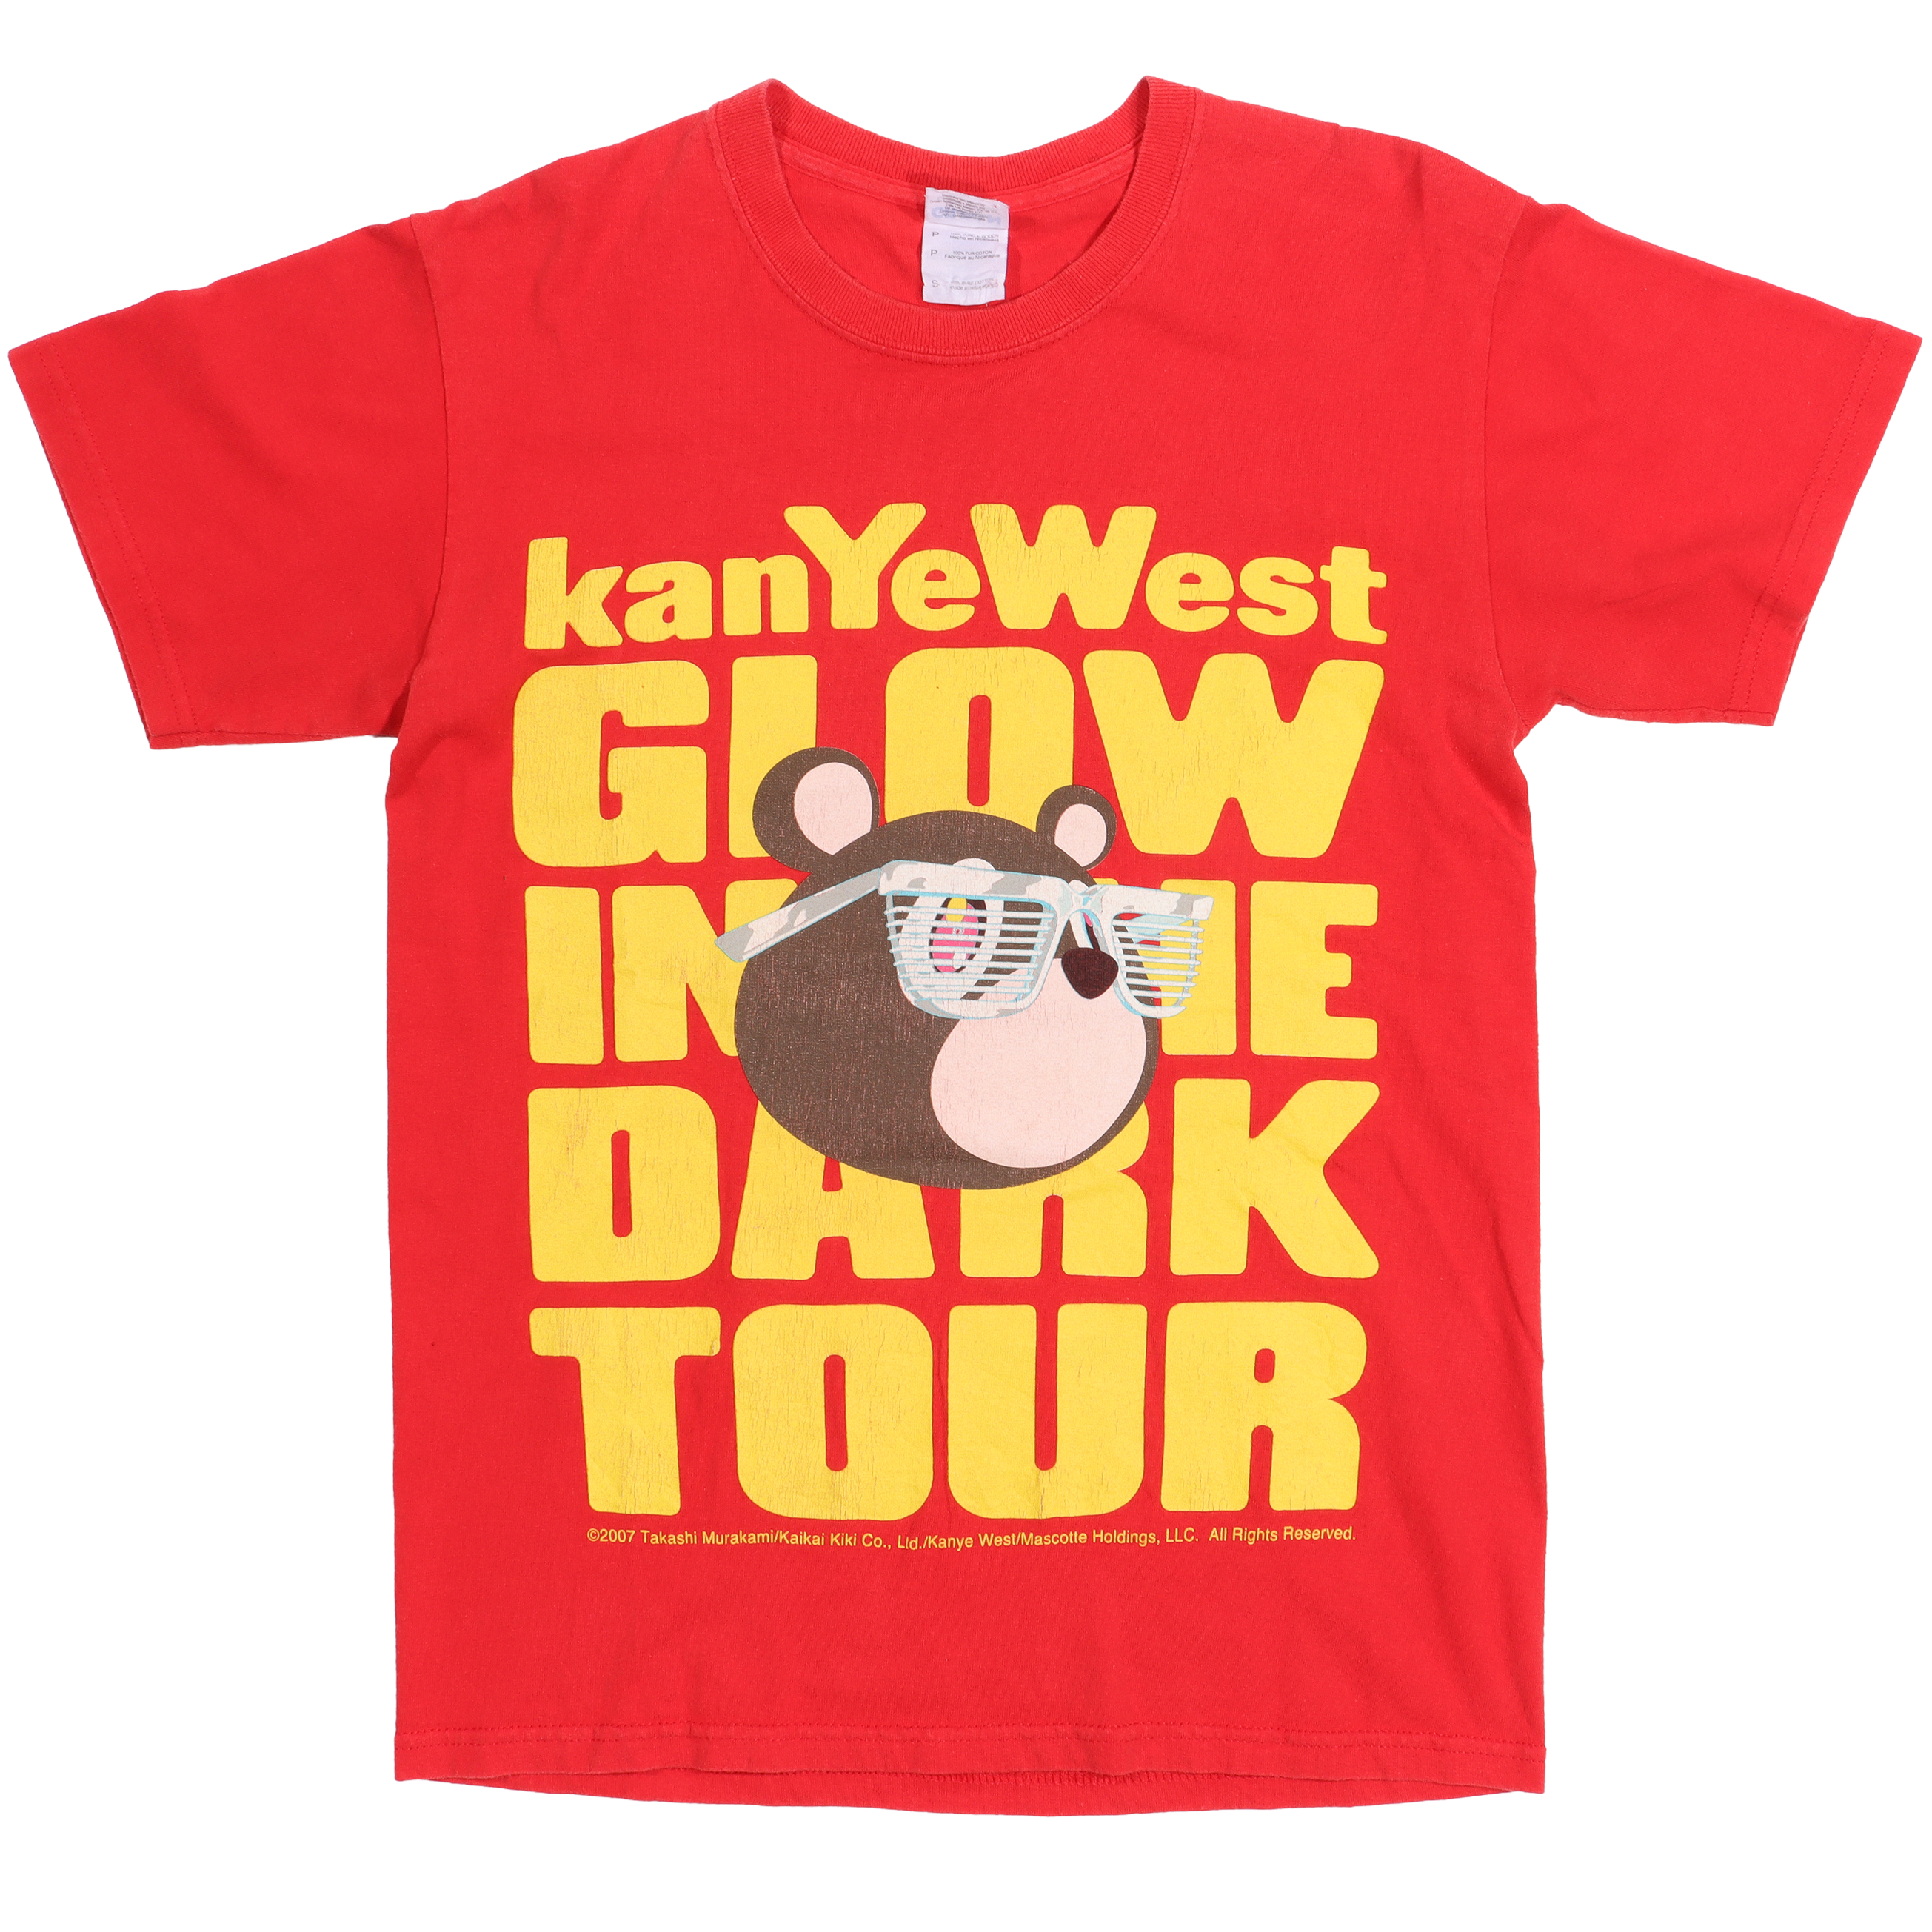 Kanye West 'Glow in The Dark' Tour T-Shirt